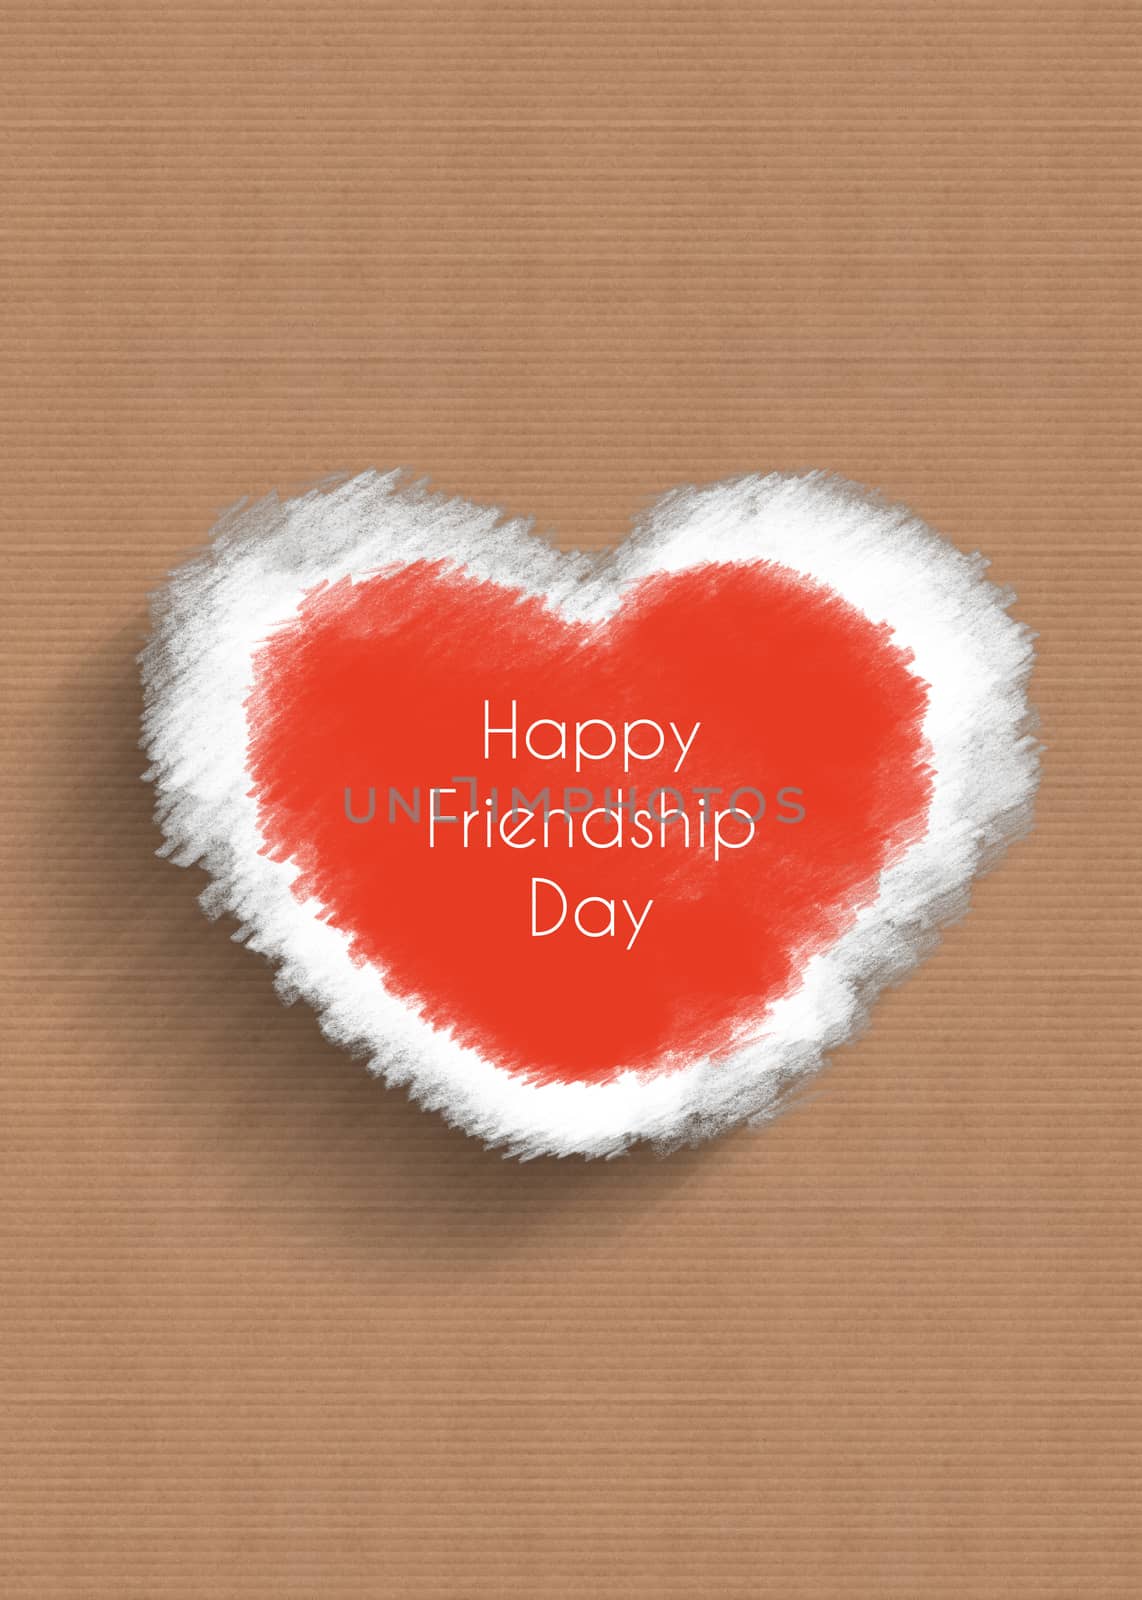 happy friendship day, heart concept by motionkarma